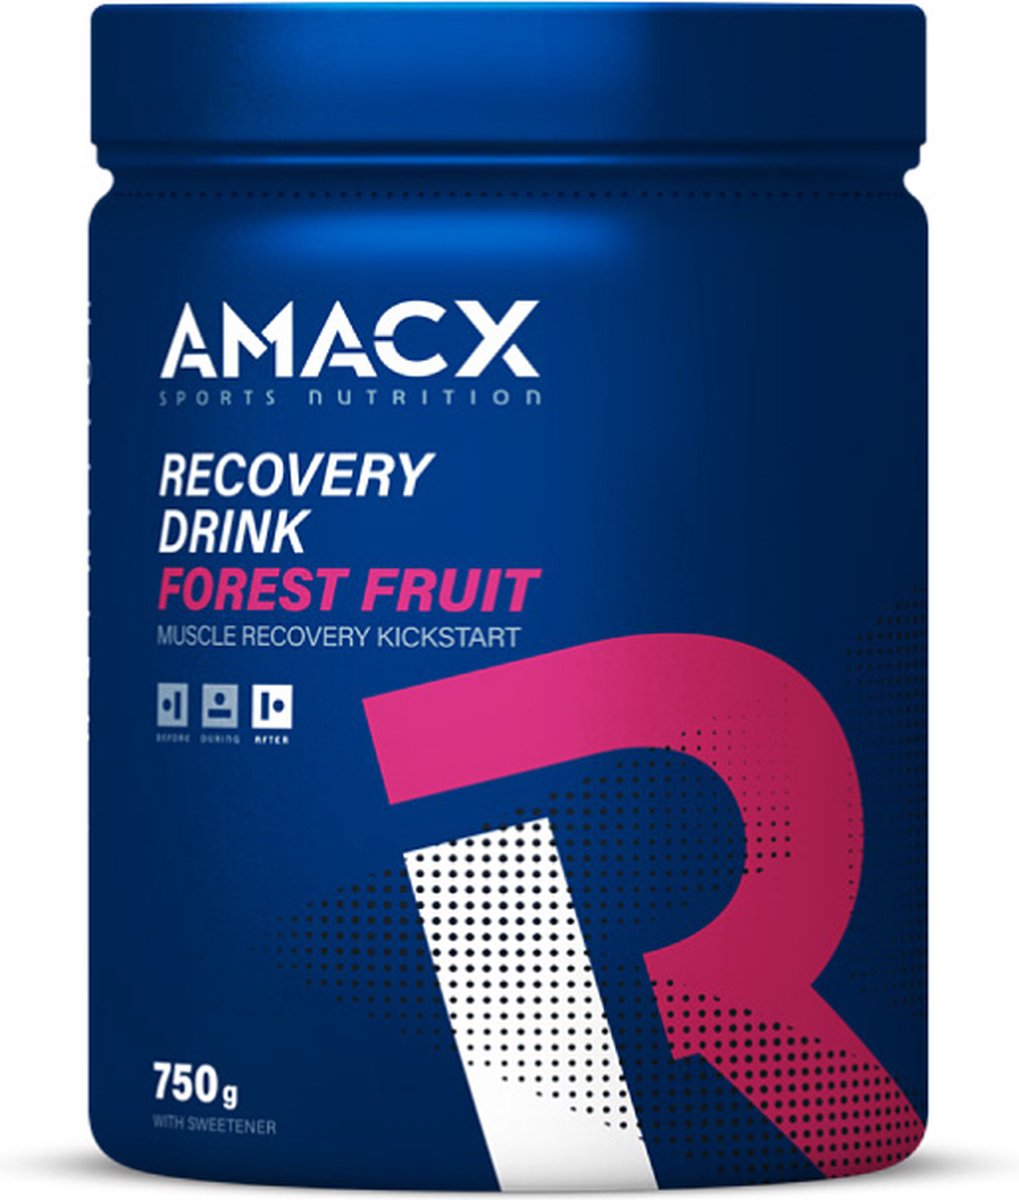 Amacx Recovery Drink - 750 gram - Forest Fruit